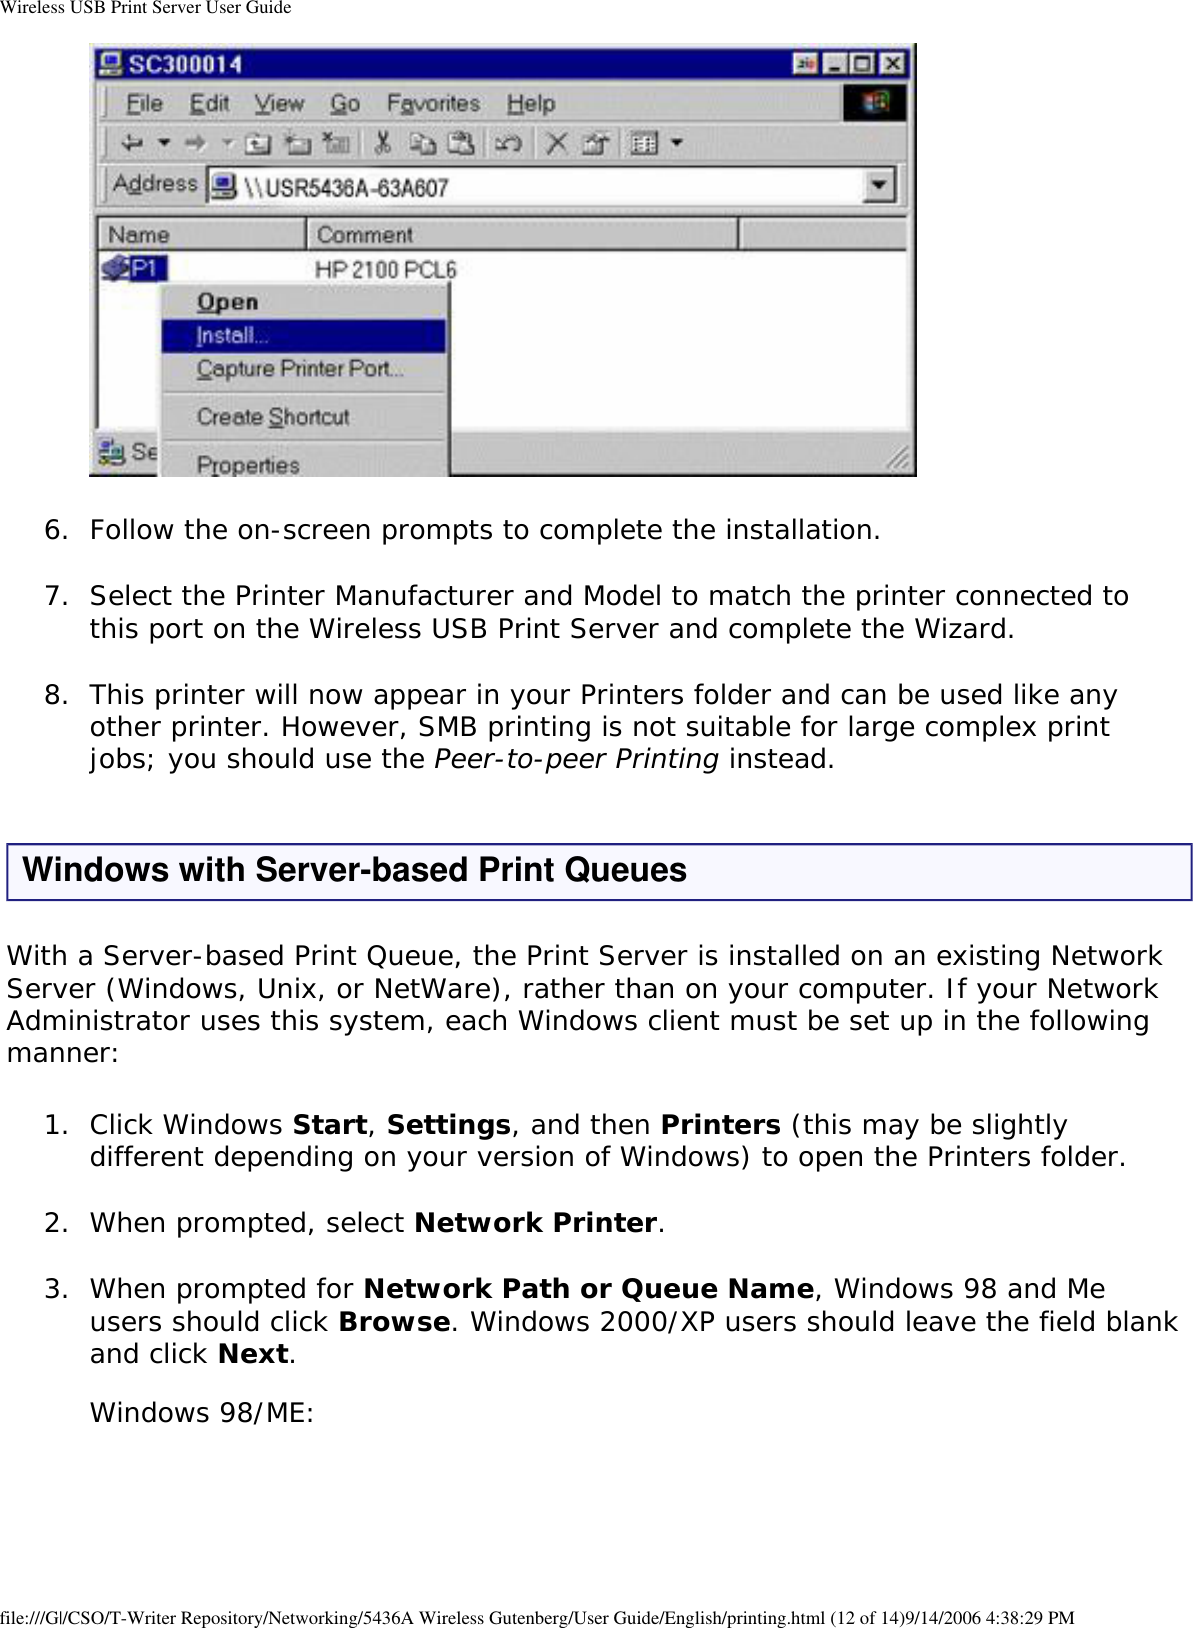 Wireless USB Print Server User Guide 6.  Follow the on-screen prompts to complete the installation. 7.  Select the Printer Manufacturer and Model to match the printer connected to this port on the Wireless USB Print Server and complete the Wizard. 8.  This printer will now appear in your Printers folder and can be used like any other printer. However, SMB printing is not suitable for large complex print jobs; you should use the Peer-to-peer Printing instead. Windows with Server-based Print QueuesWith a Server-based Print Queue, the Print Server is installed on an existing Network Server (Windows, Unix, or NetWare), rather than on your computer. If your Network Administrator uses this system, each Windows client must be set up in the following manner:1.  Click Windows Start, Settings, and then Printers (this may be slightly different depending on your version of Windows) to open the Printers folder. 2.  When prompted, select Network Printer. 3.  When prompted for Network Path or Queue Name, Windows 98 and Me users should click Browse. Windows 2000/XP users should leave the field blank and click Next.   Windows 98/ME:  file:///G|/CSO/T-Writer Repository/Networking/5436A Wireless Gutenberg/User Guide/English/printing.html (12 of 14)9/14/2006 4:38:29 PM